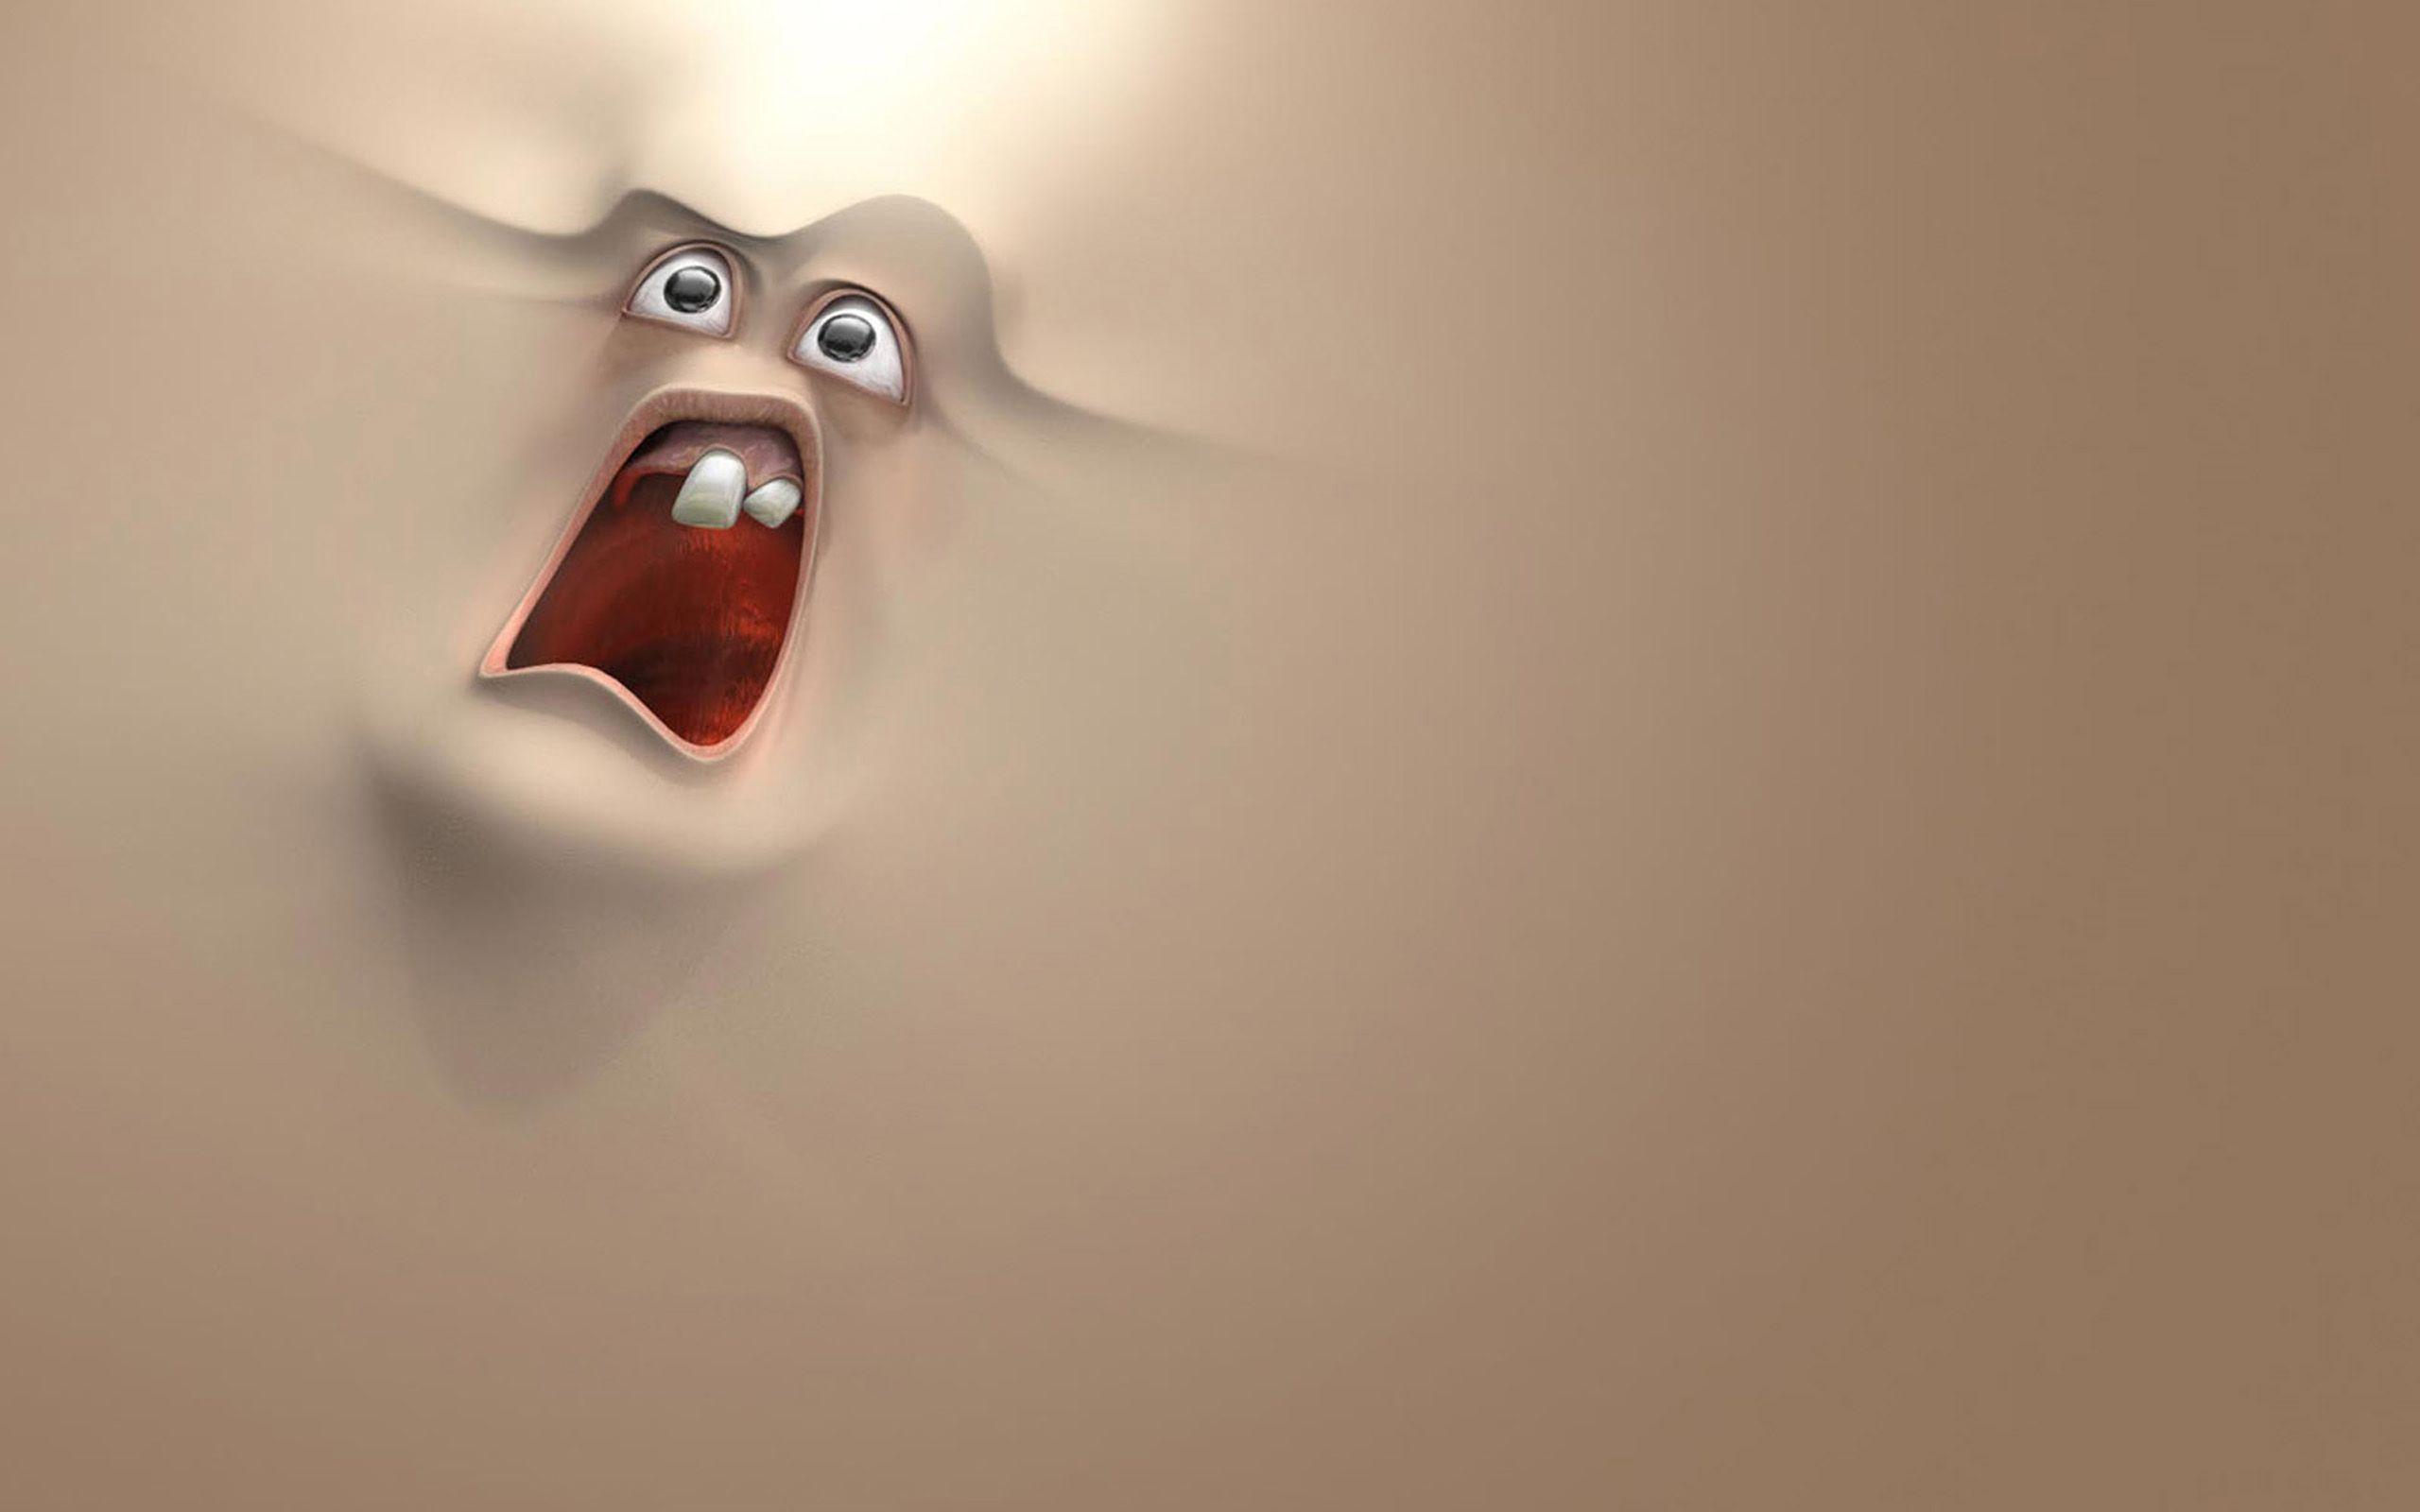 funny face wallpaper download